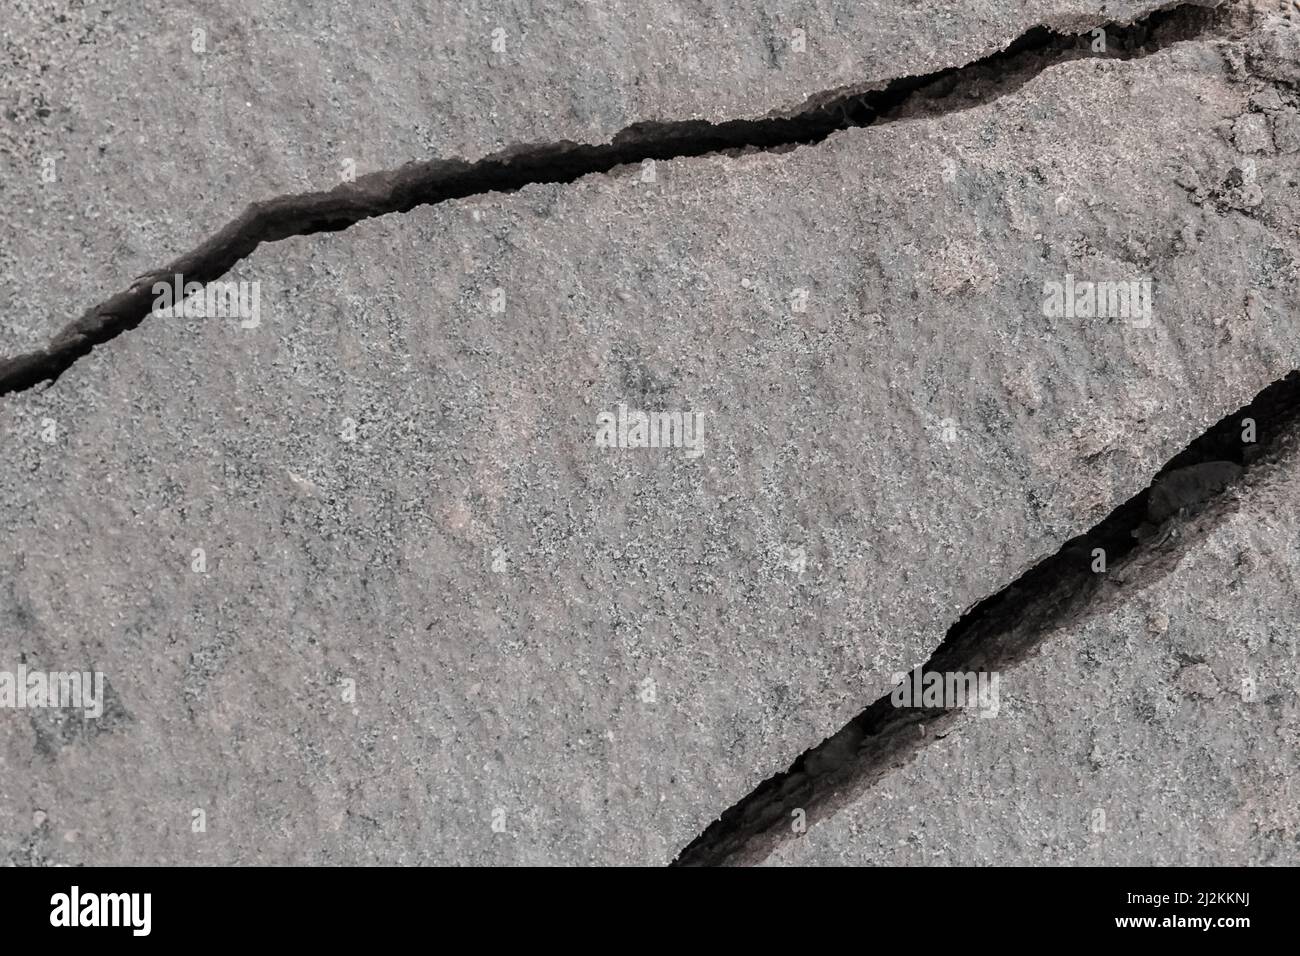 Large crack after earthquake on the soil surface of the earth damaged ground background climate pattern. Stock Photo